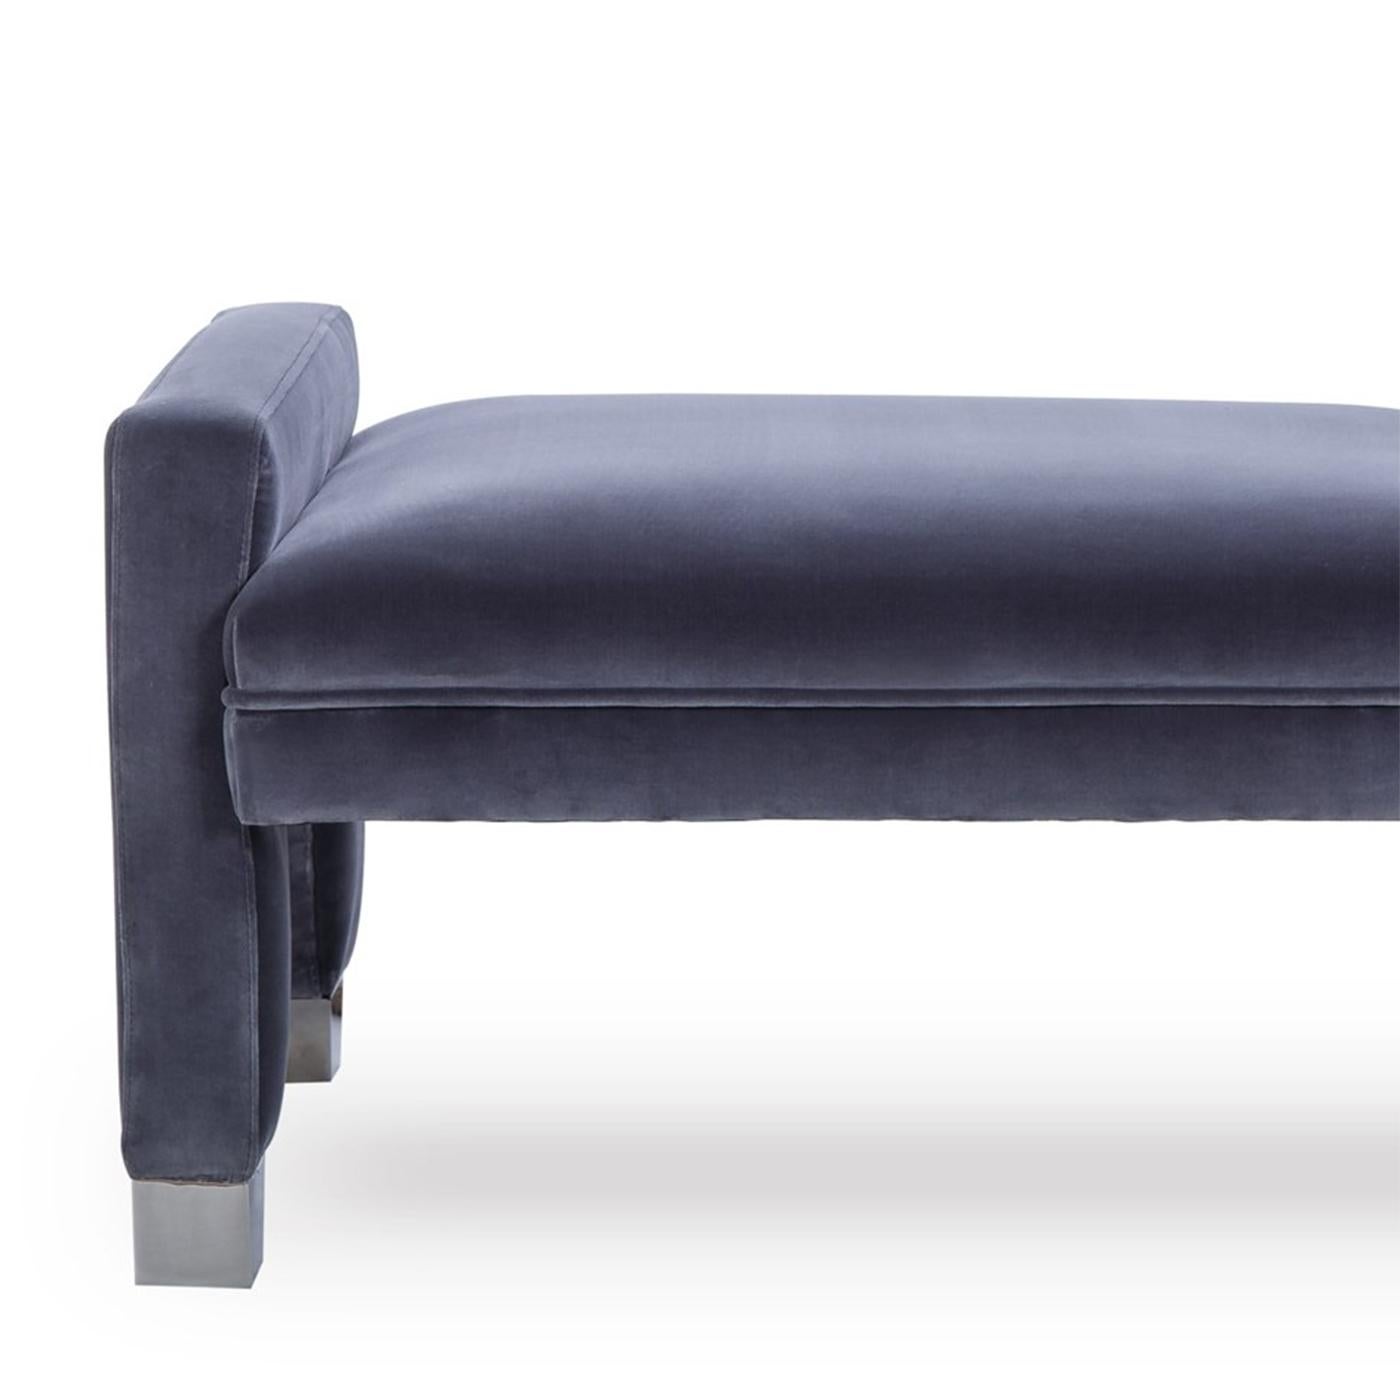 Hand-Crafted Barry Bench with Faded Blue Velvet